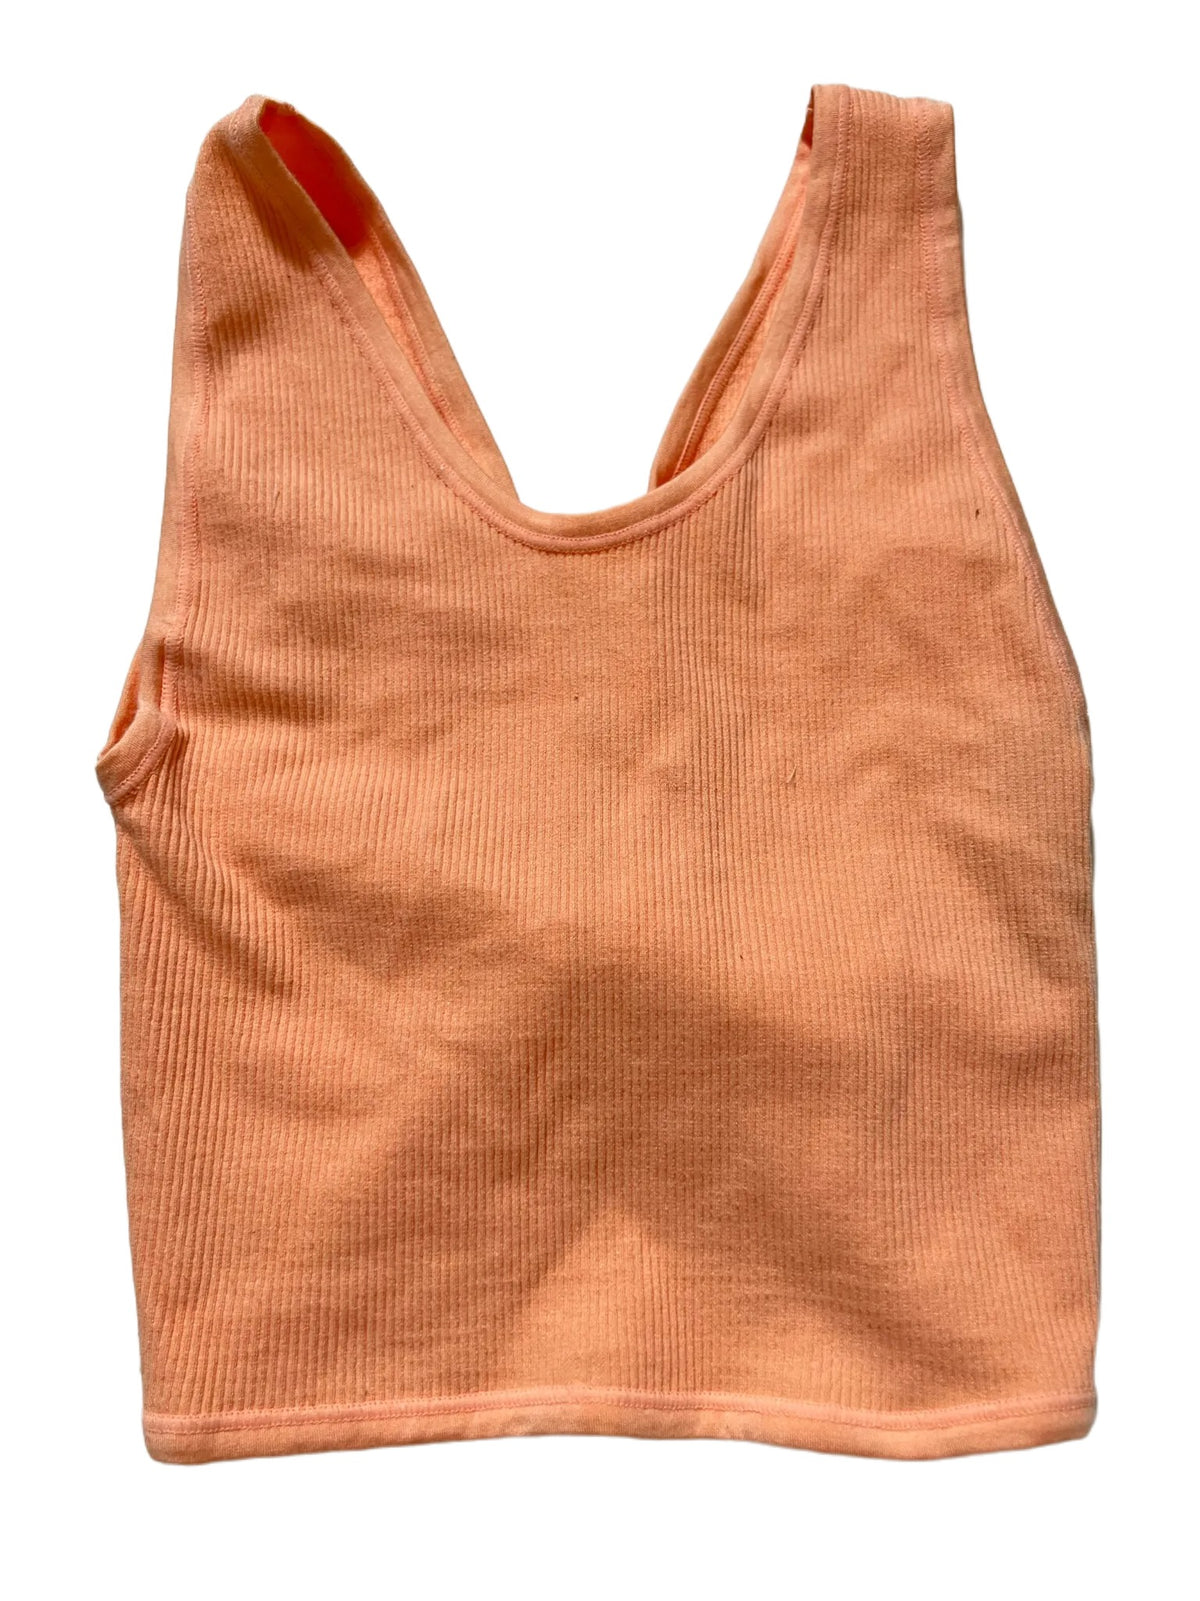 Urban Outfitters- Pink Twist Front Tank Top